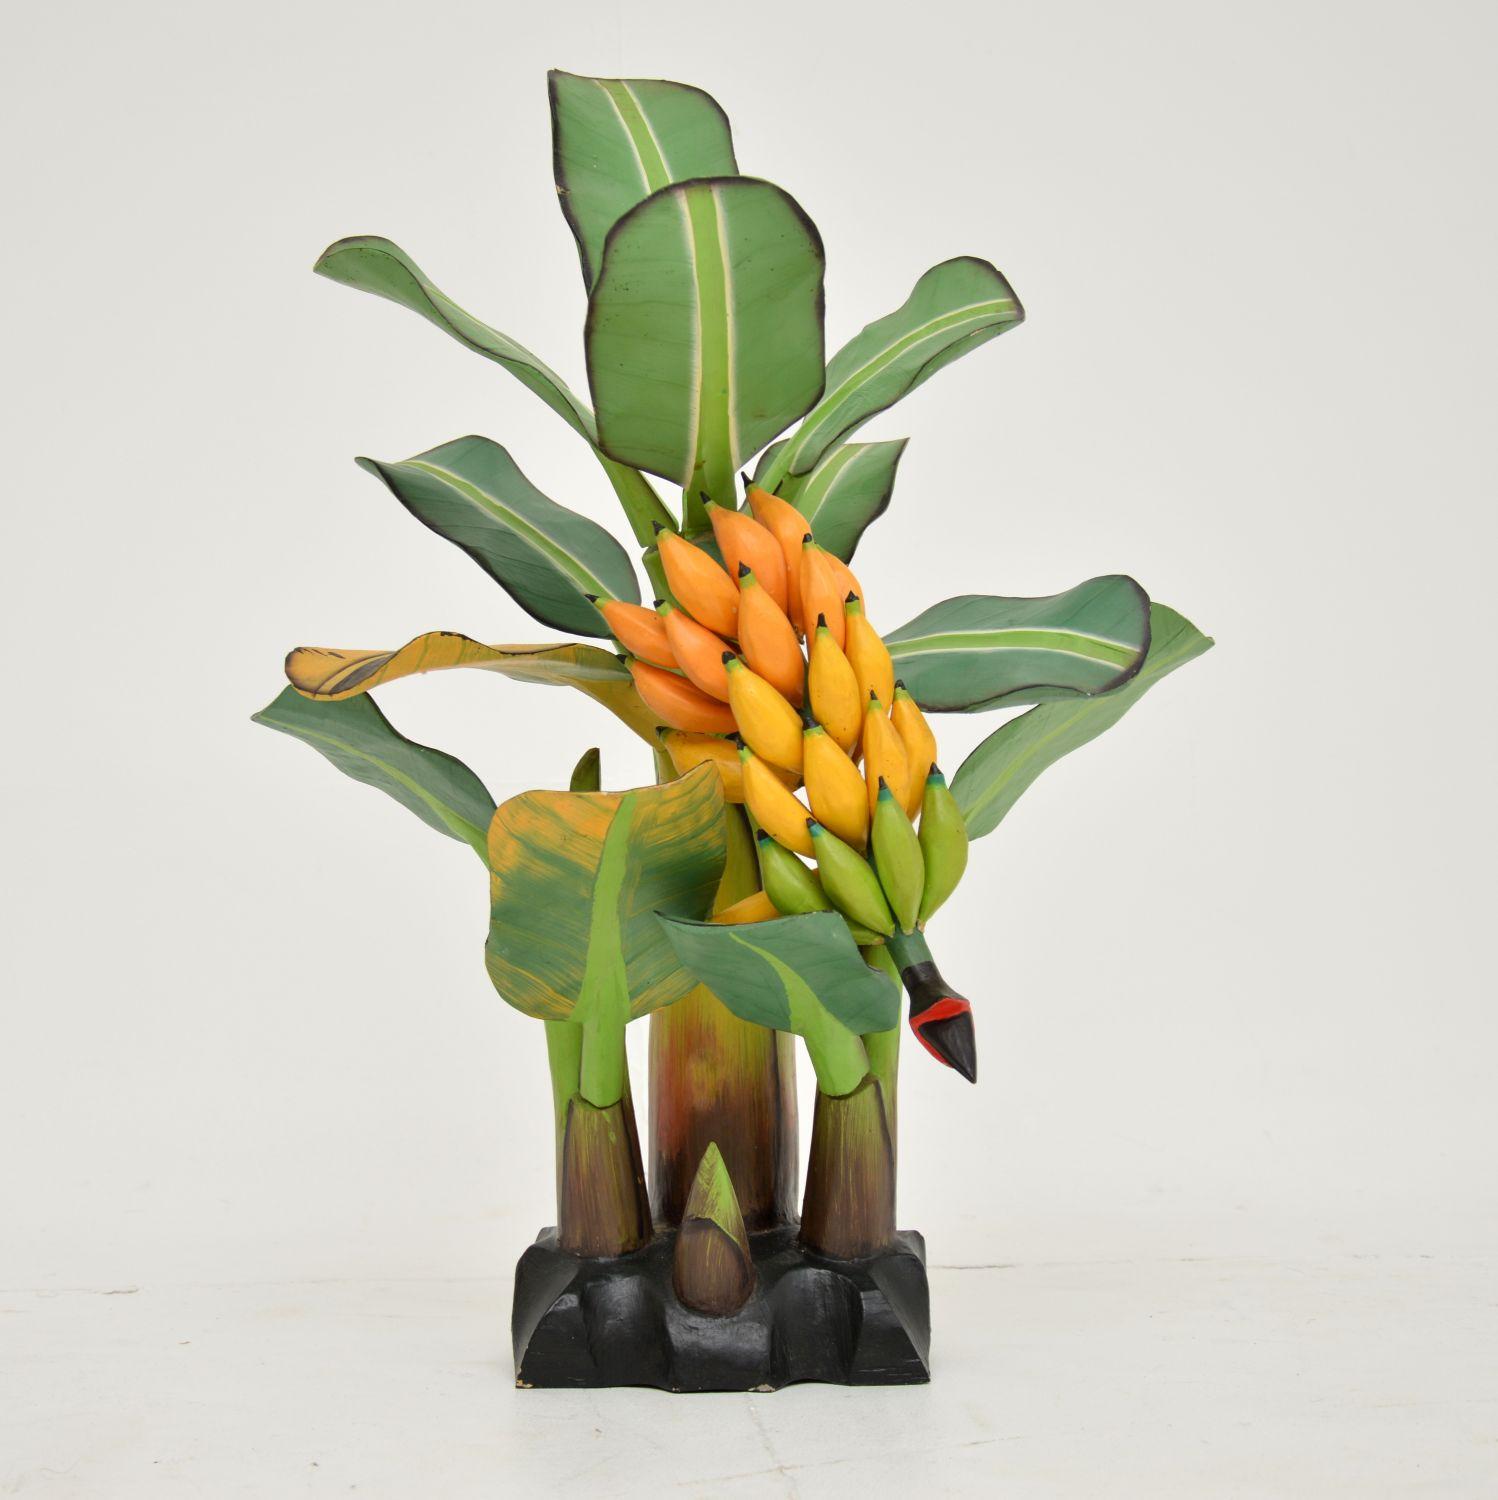 A beautiful and playful vintage carved wooden table top sculpture of a banana tree. This was obtained by a lady who got it while travelling South america in the 1970’s.

It is beautifully carved and painted, with stunning colours and intricate